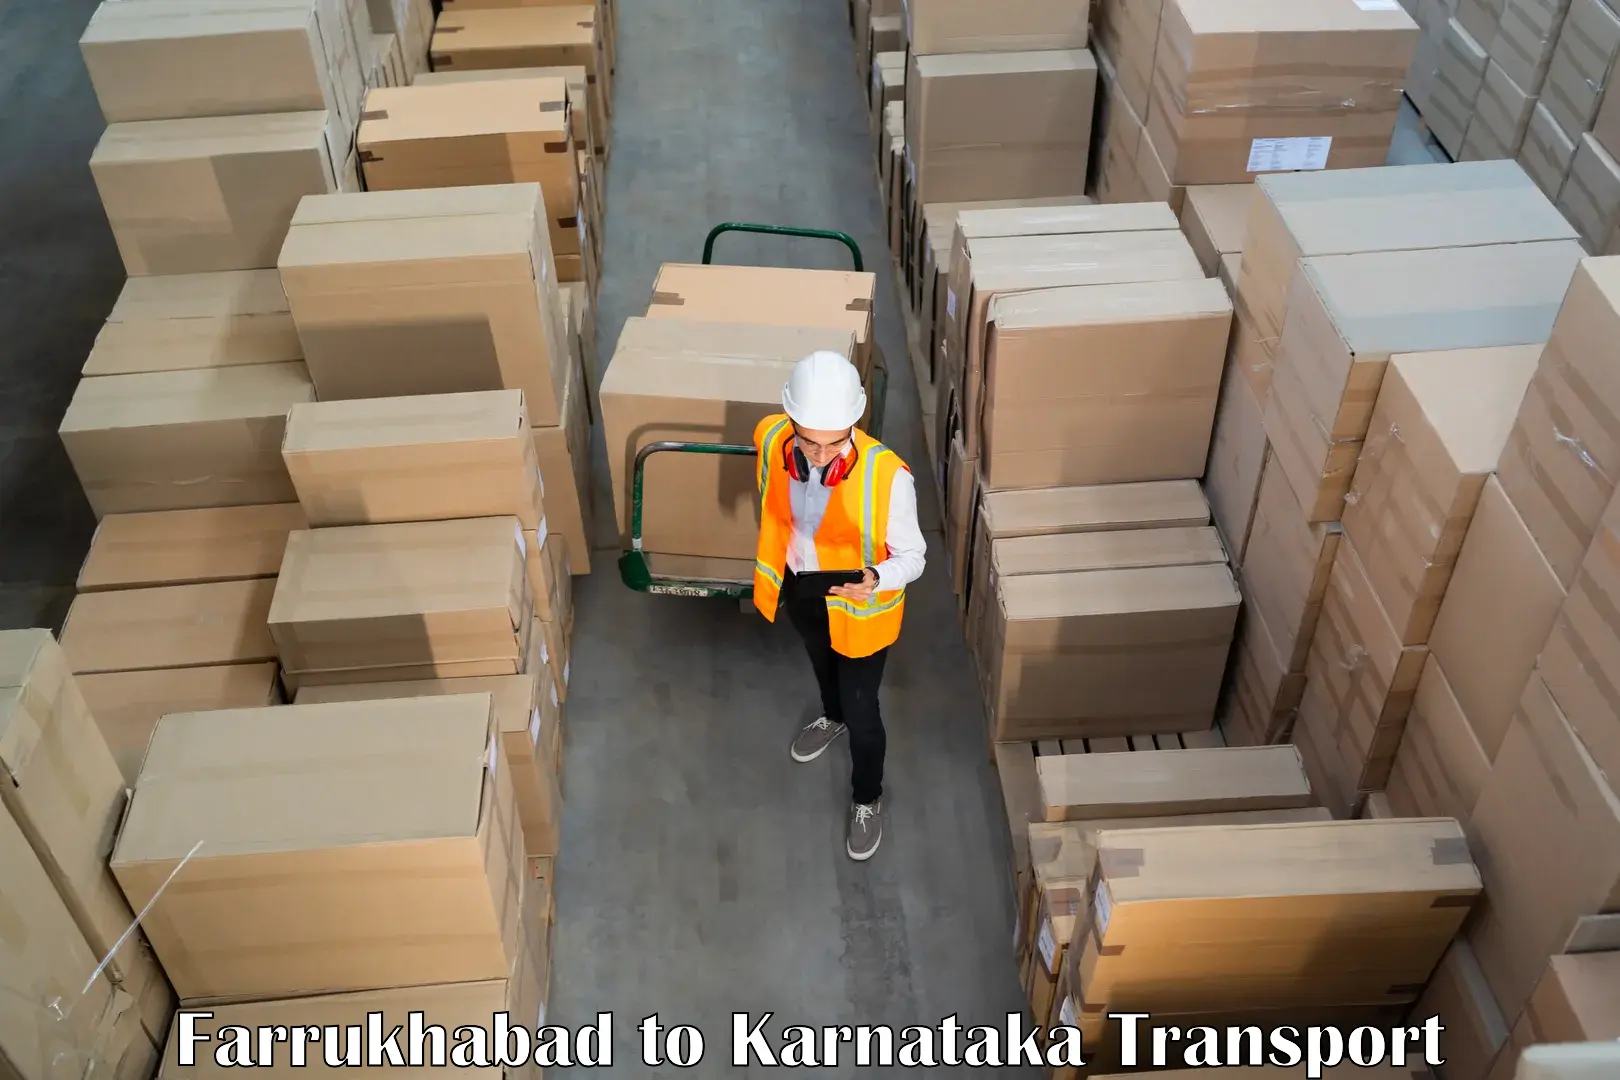 Air freight transport services in Farrukhabad to Bangalore